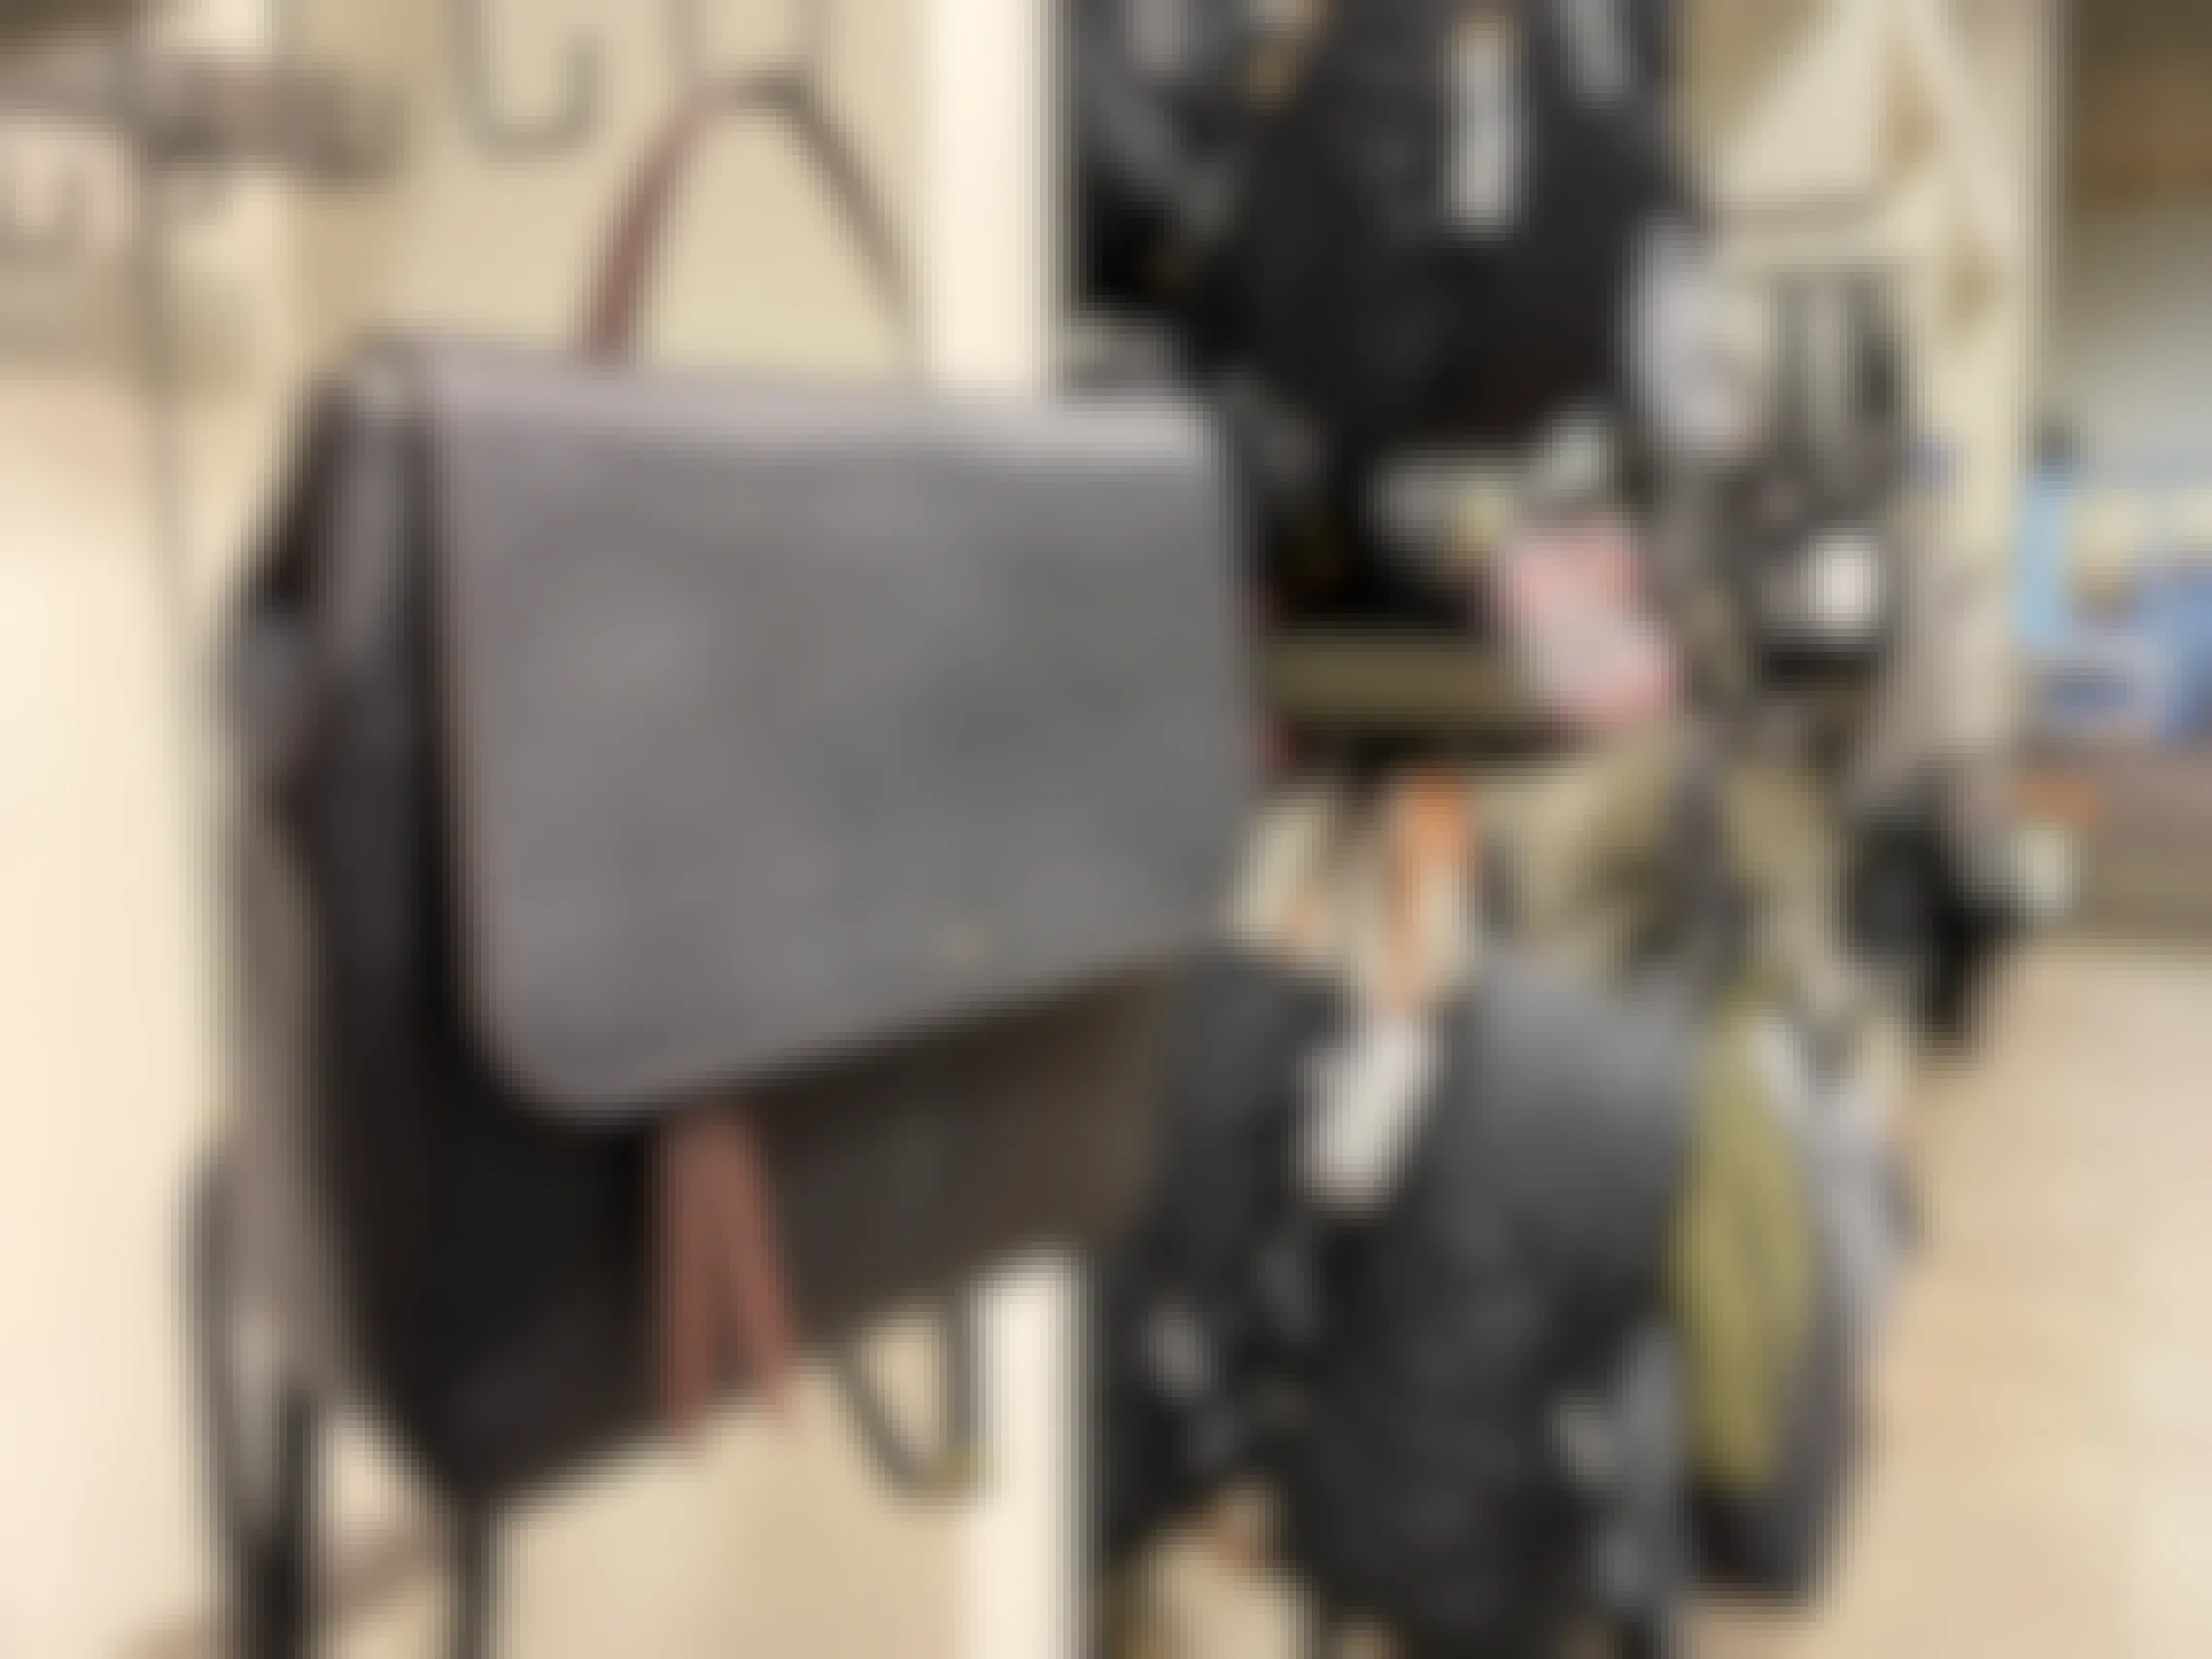 A fossil bag with other purses and backpacks hung on hooks inside a DSW store.